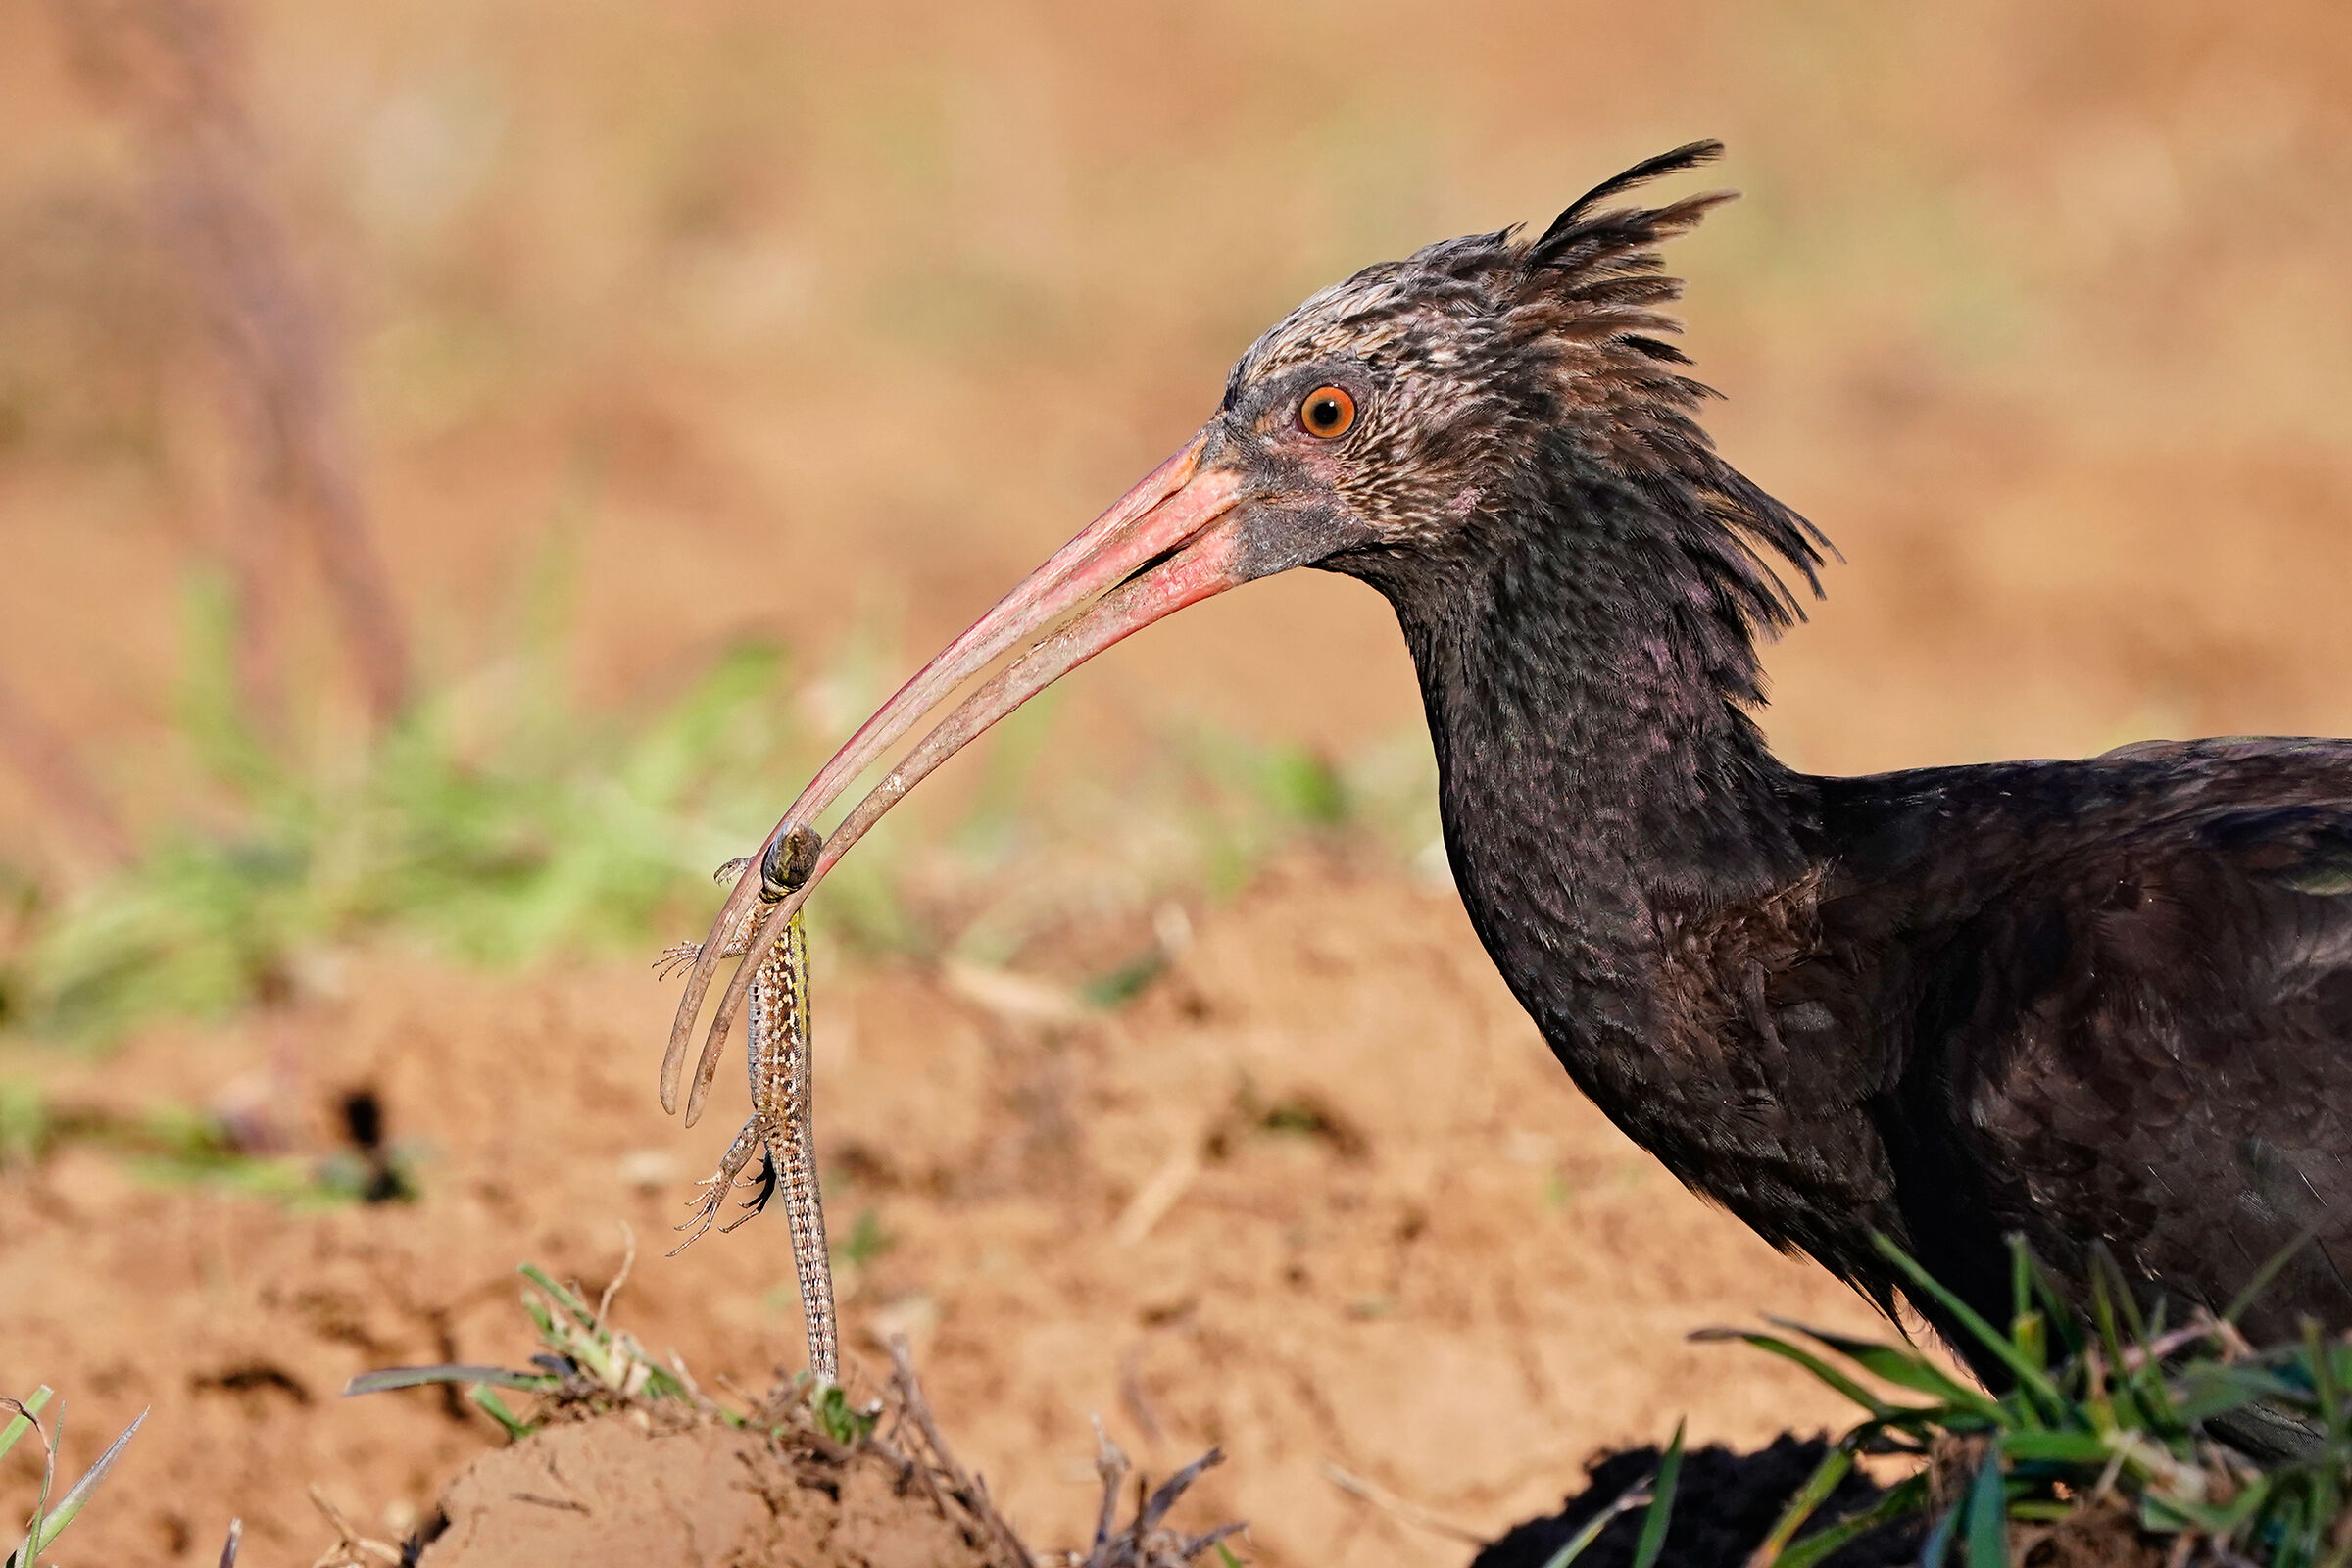 The dinner of the hermit ibis...